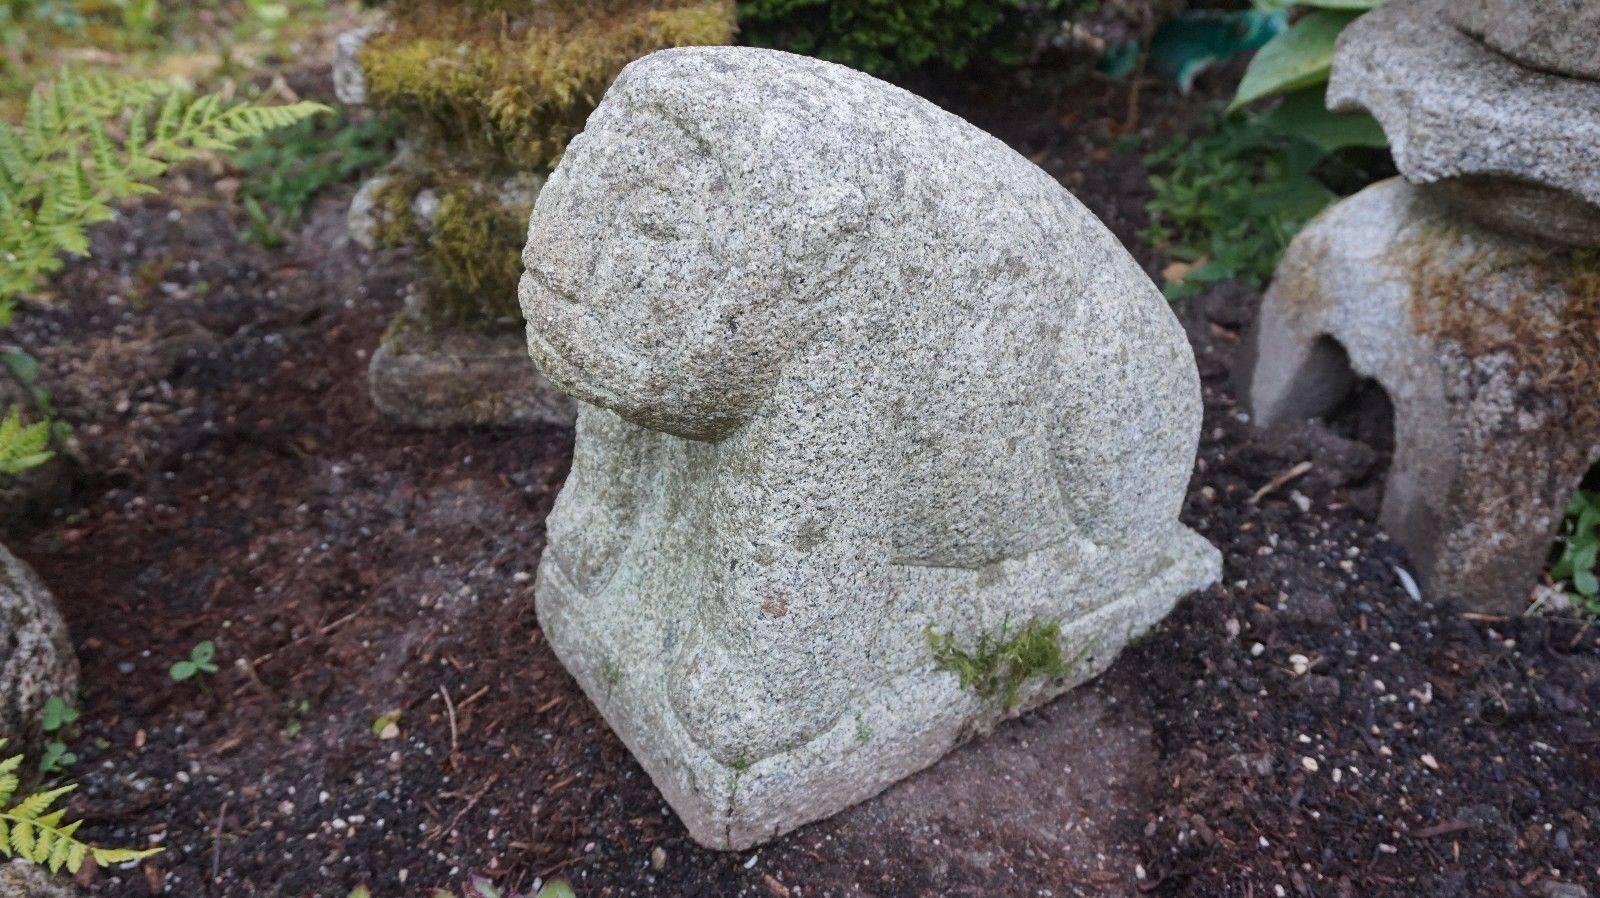 Here's one of the only hand-carved antique granite stone tigers we have had the pleasure of owning- a superb garden treasure from Korea. 

This is a finely crafted hand-carved effigy of a seated Tiger. 

Quality: Good condition with finely carved